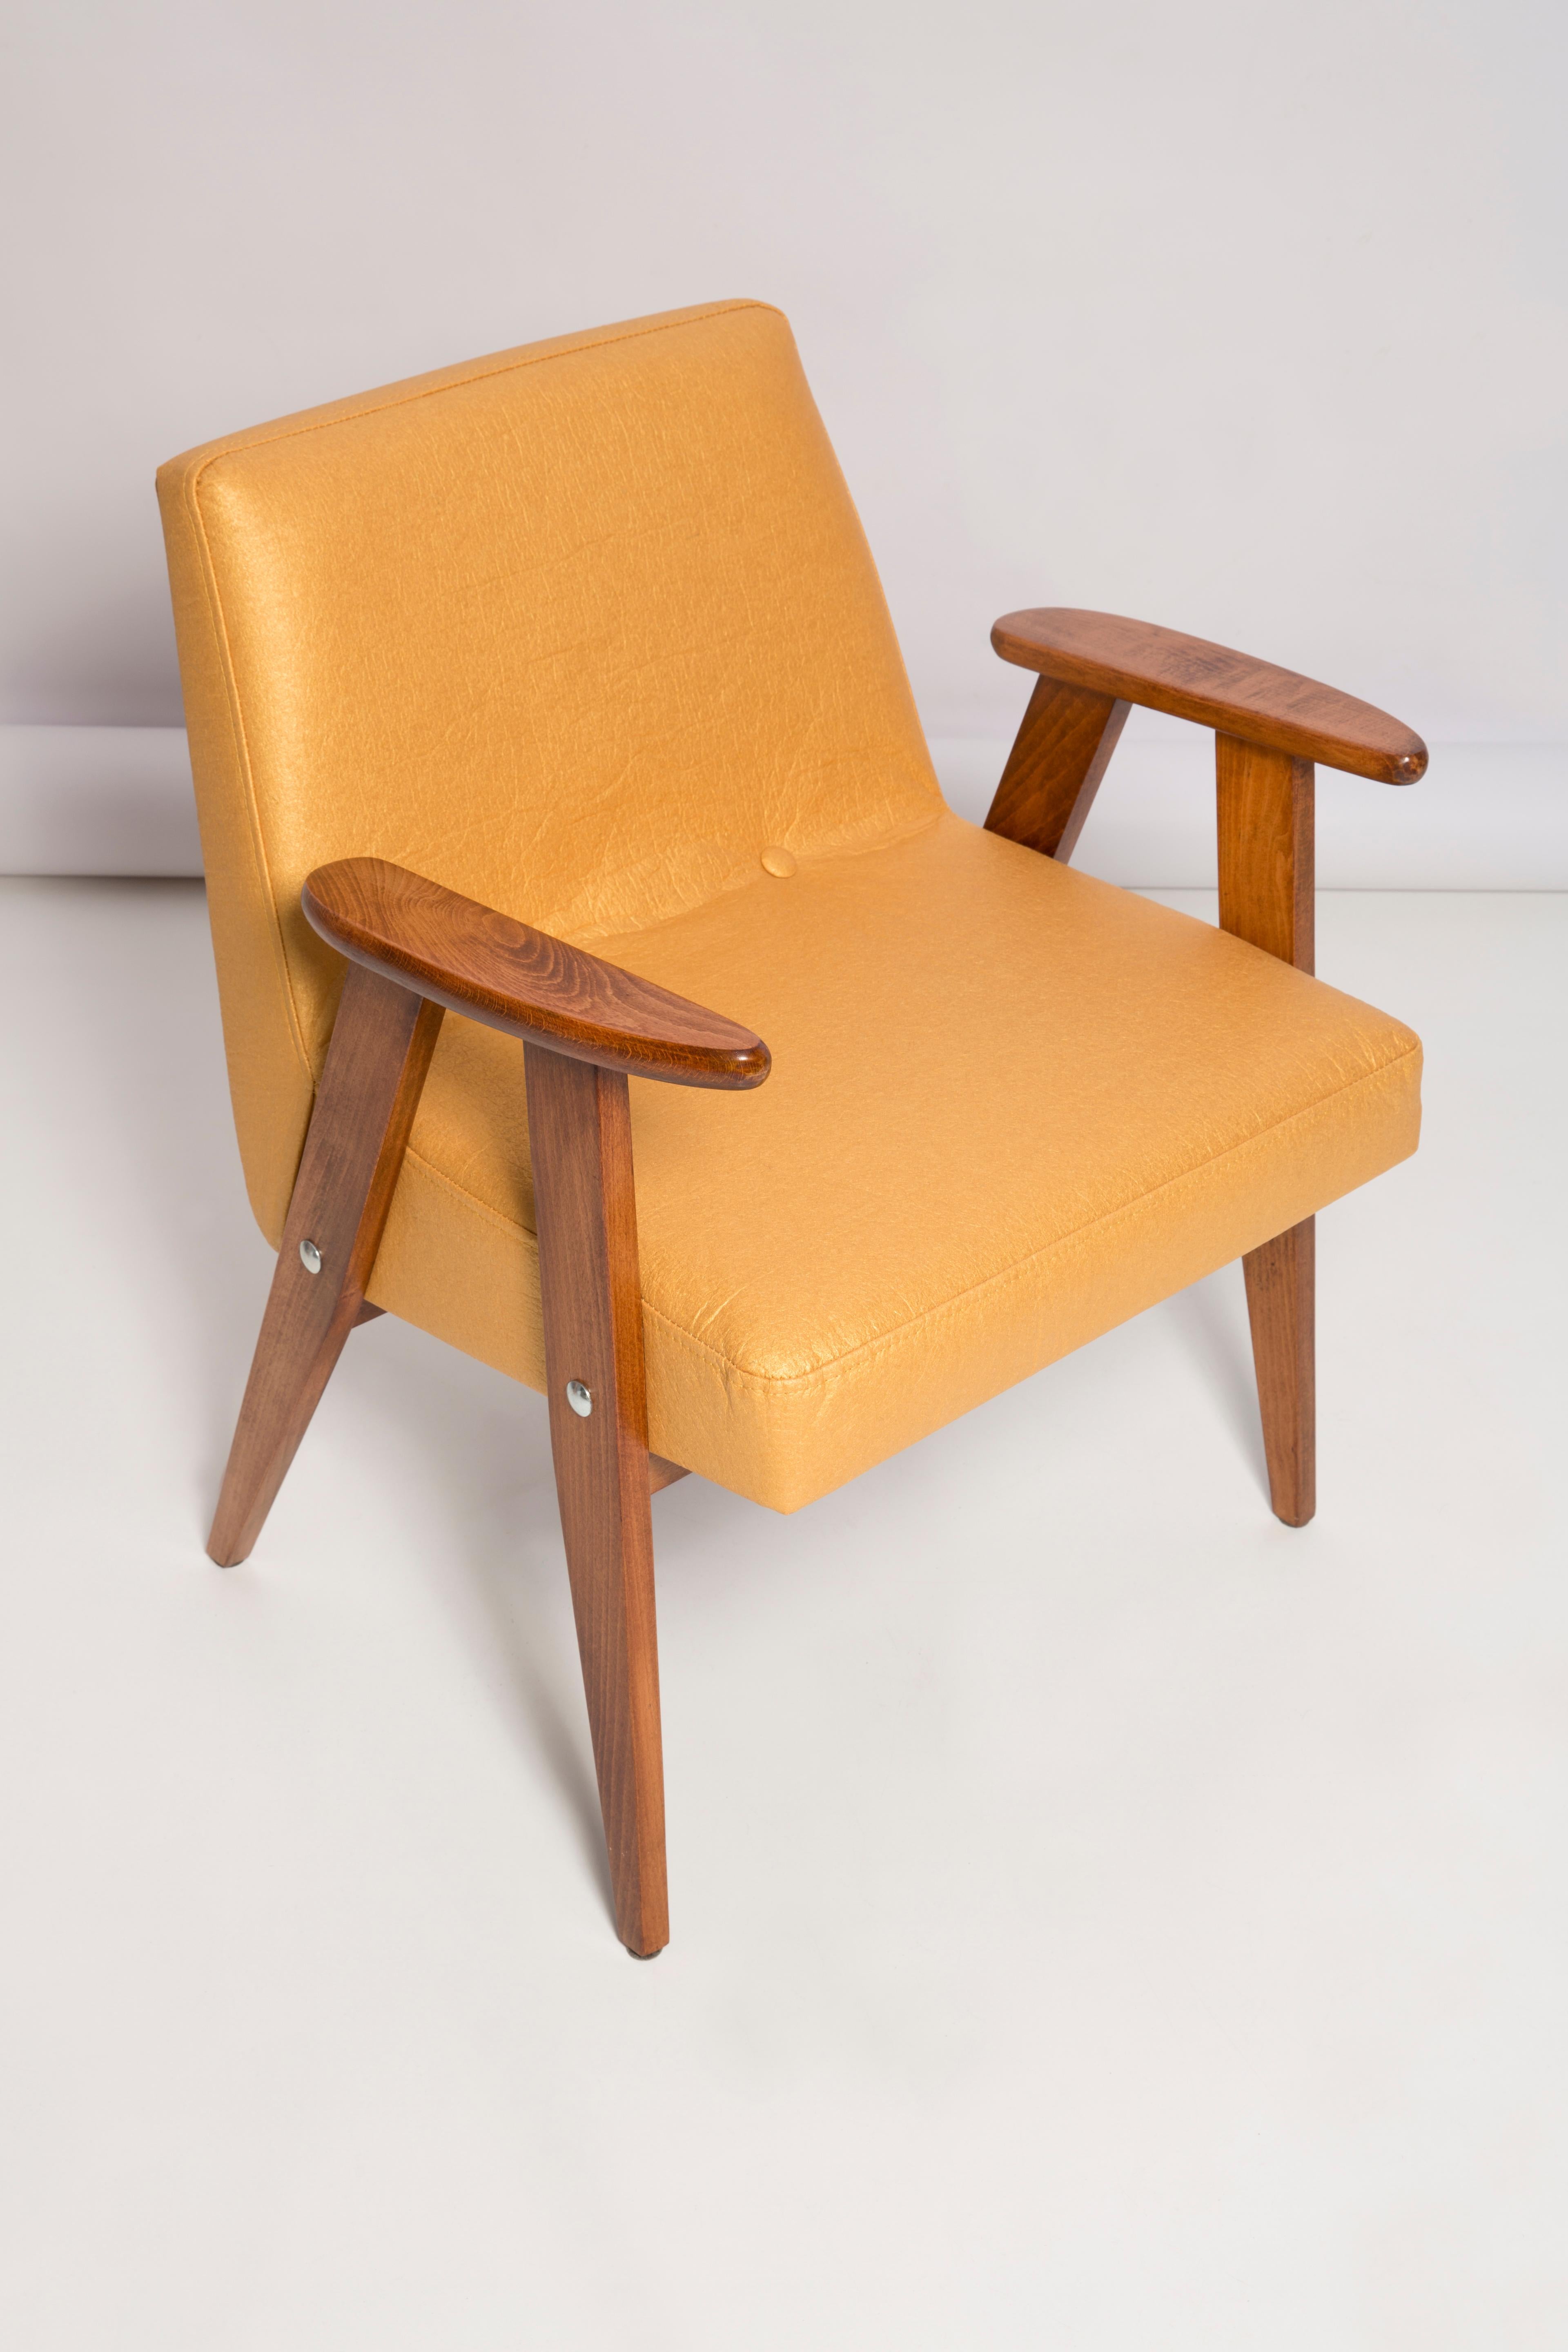 Mid-Century Modern Two Midcentury 366 Club Armchairs in Pineapple Leather, Jozef Chierowski, 1960s For Sale